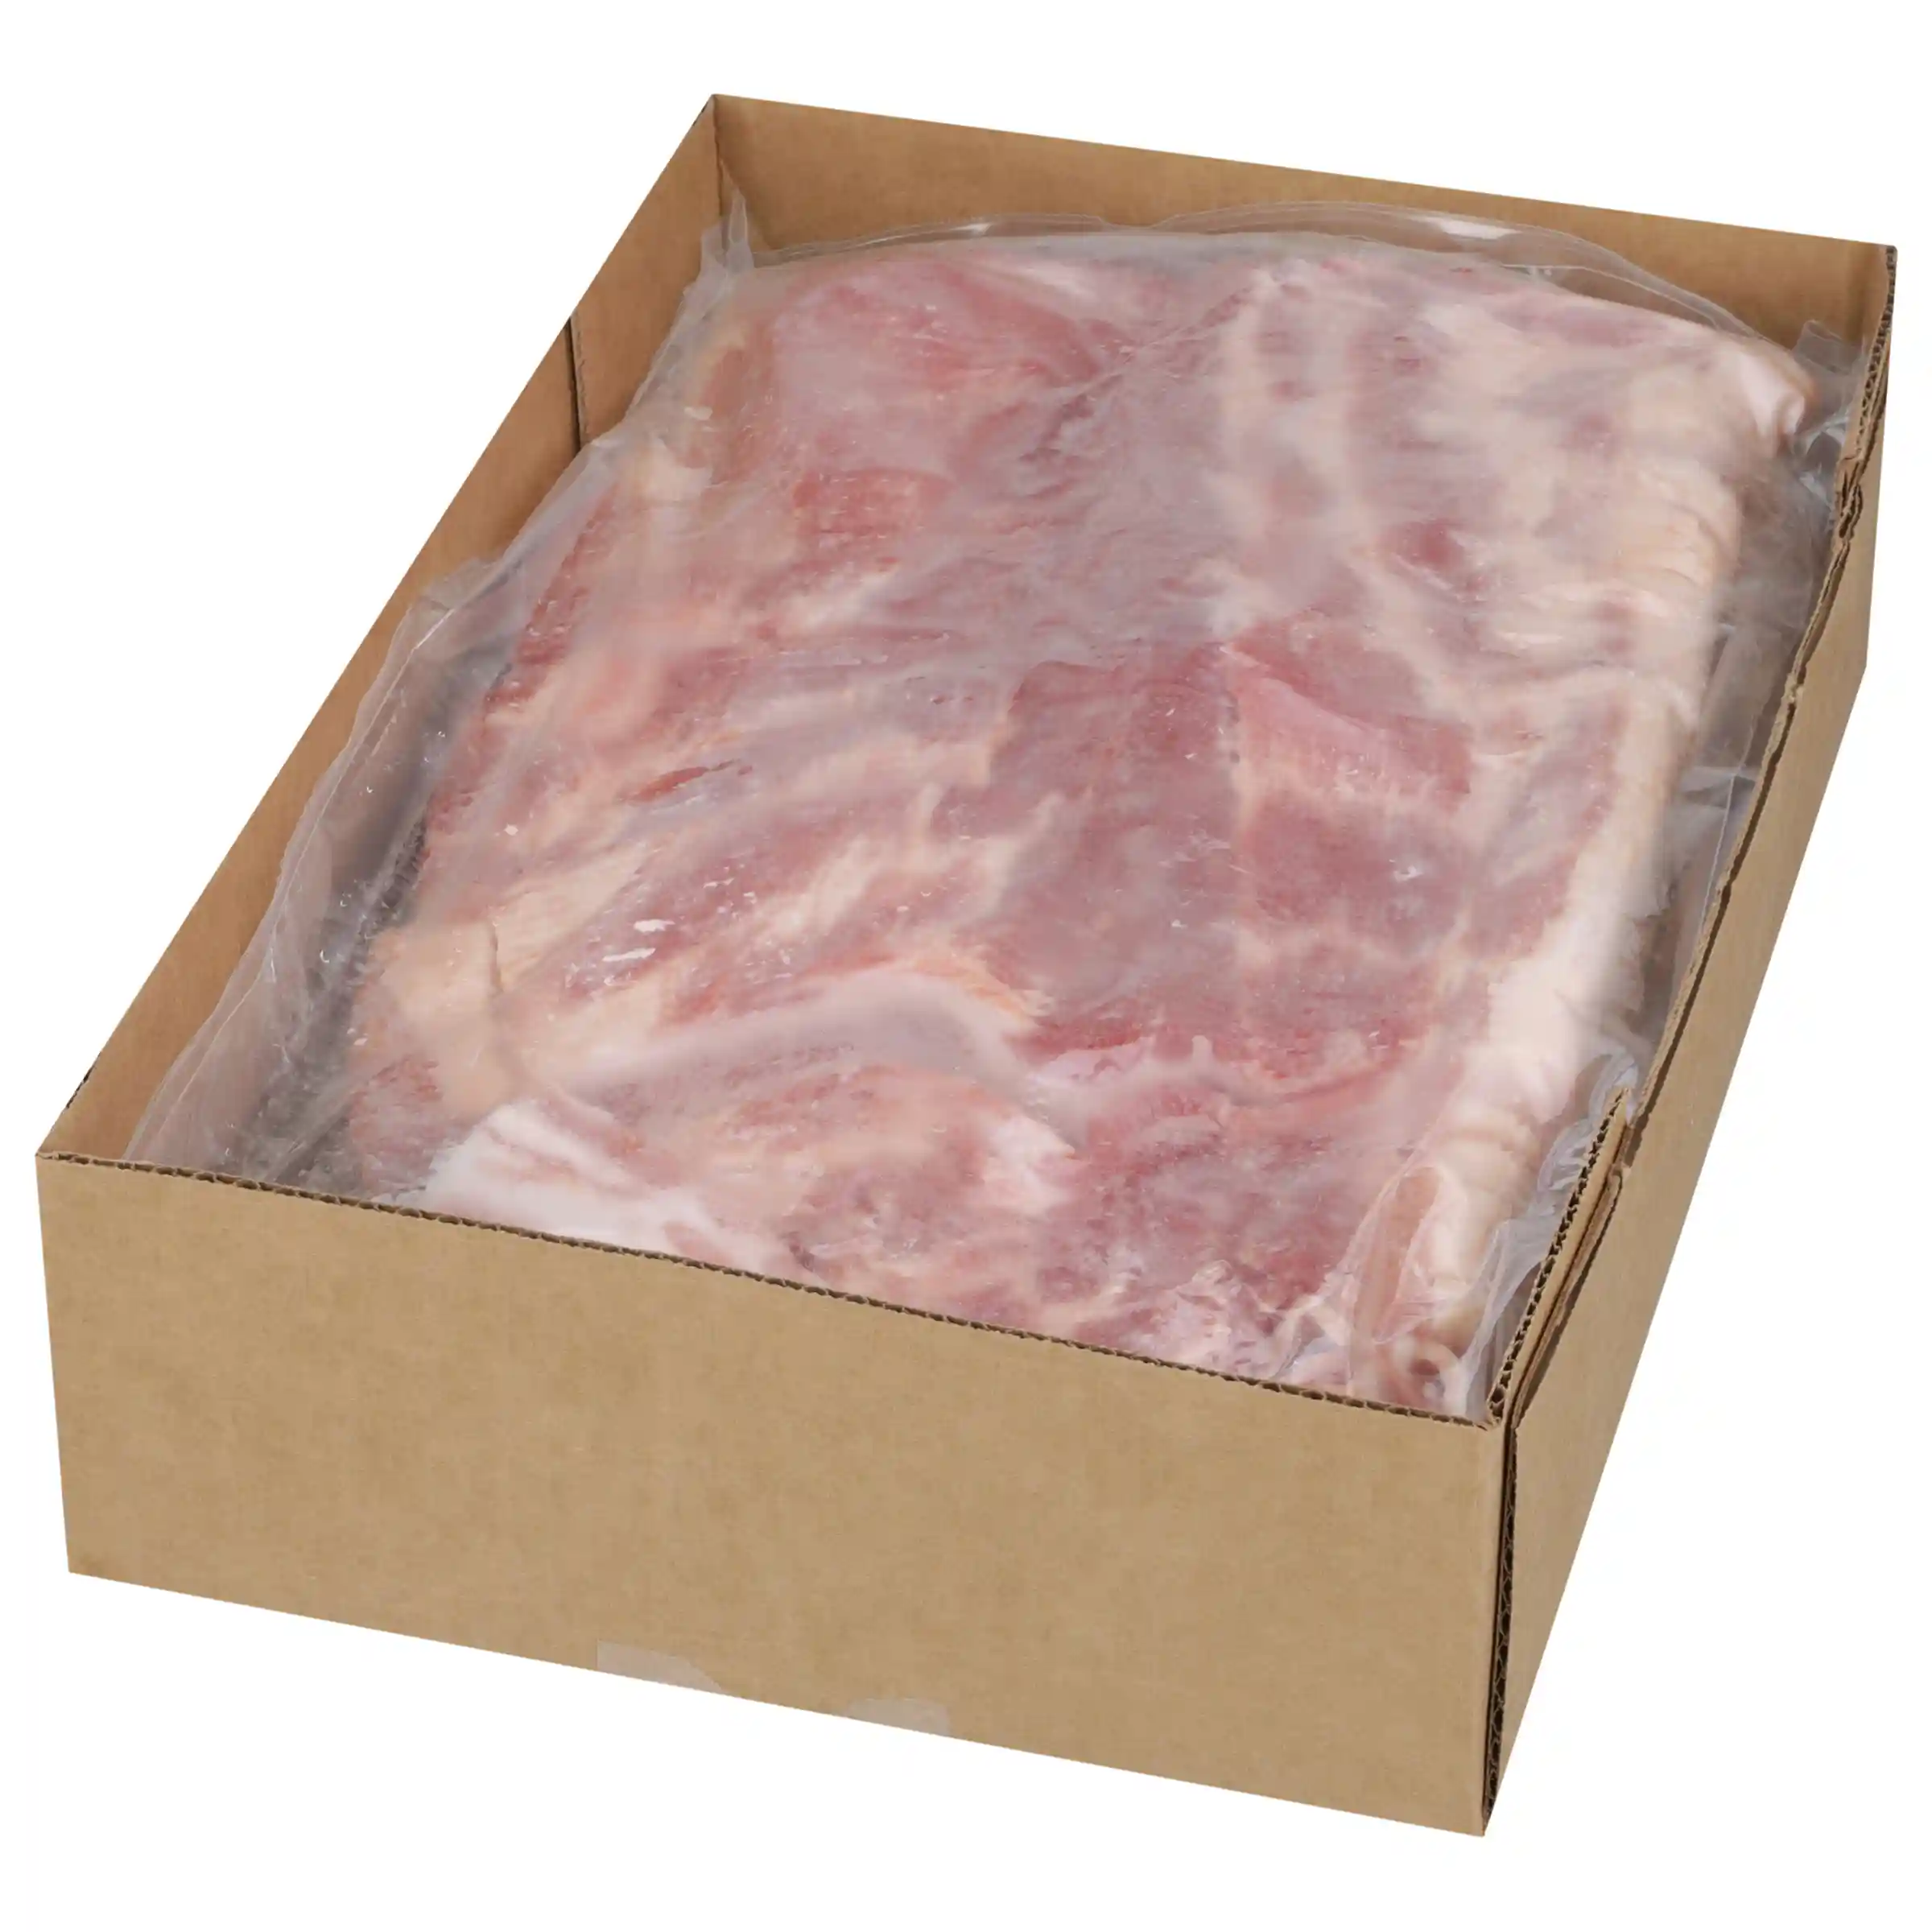 Wright® Brand Naturally Applewood Smoked Thick Sliced Bacon, Bulk, 10-14 Slices per Pound, Gas Flushed_image_31